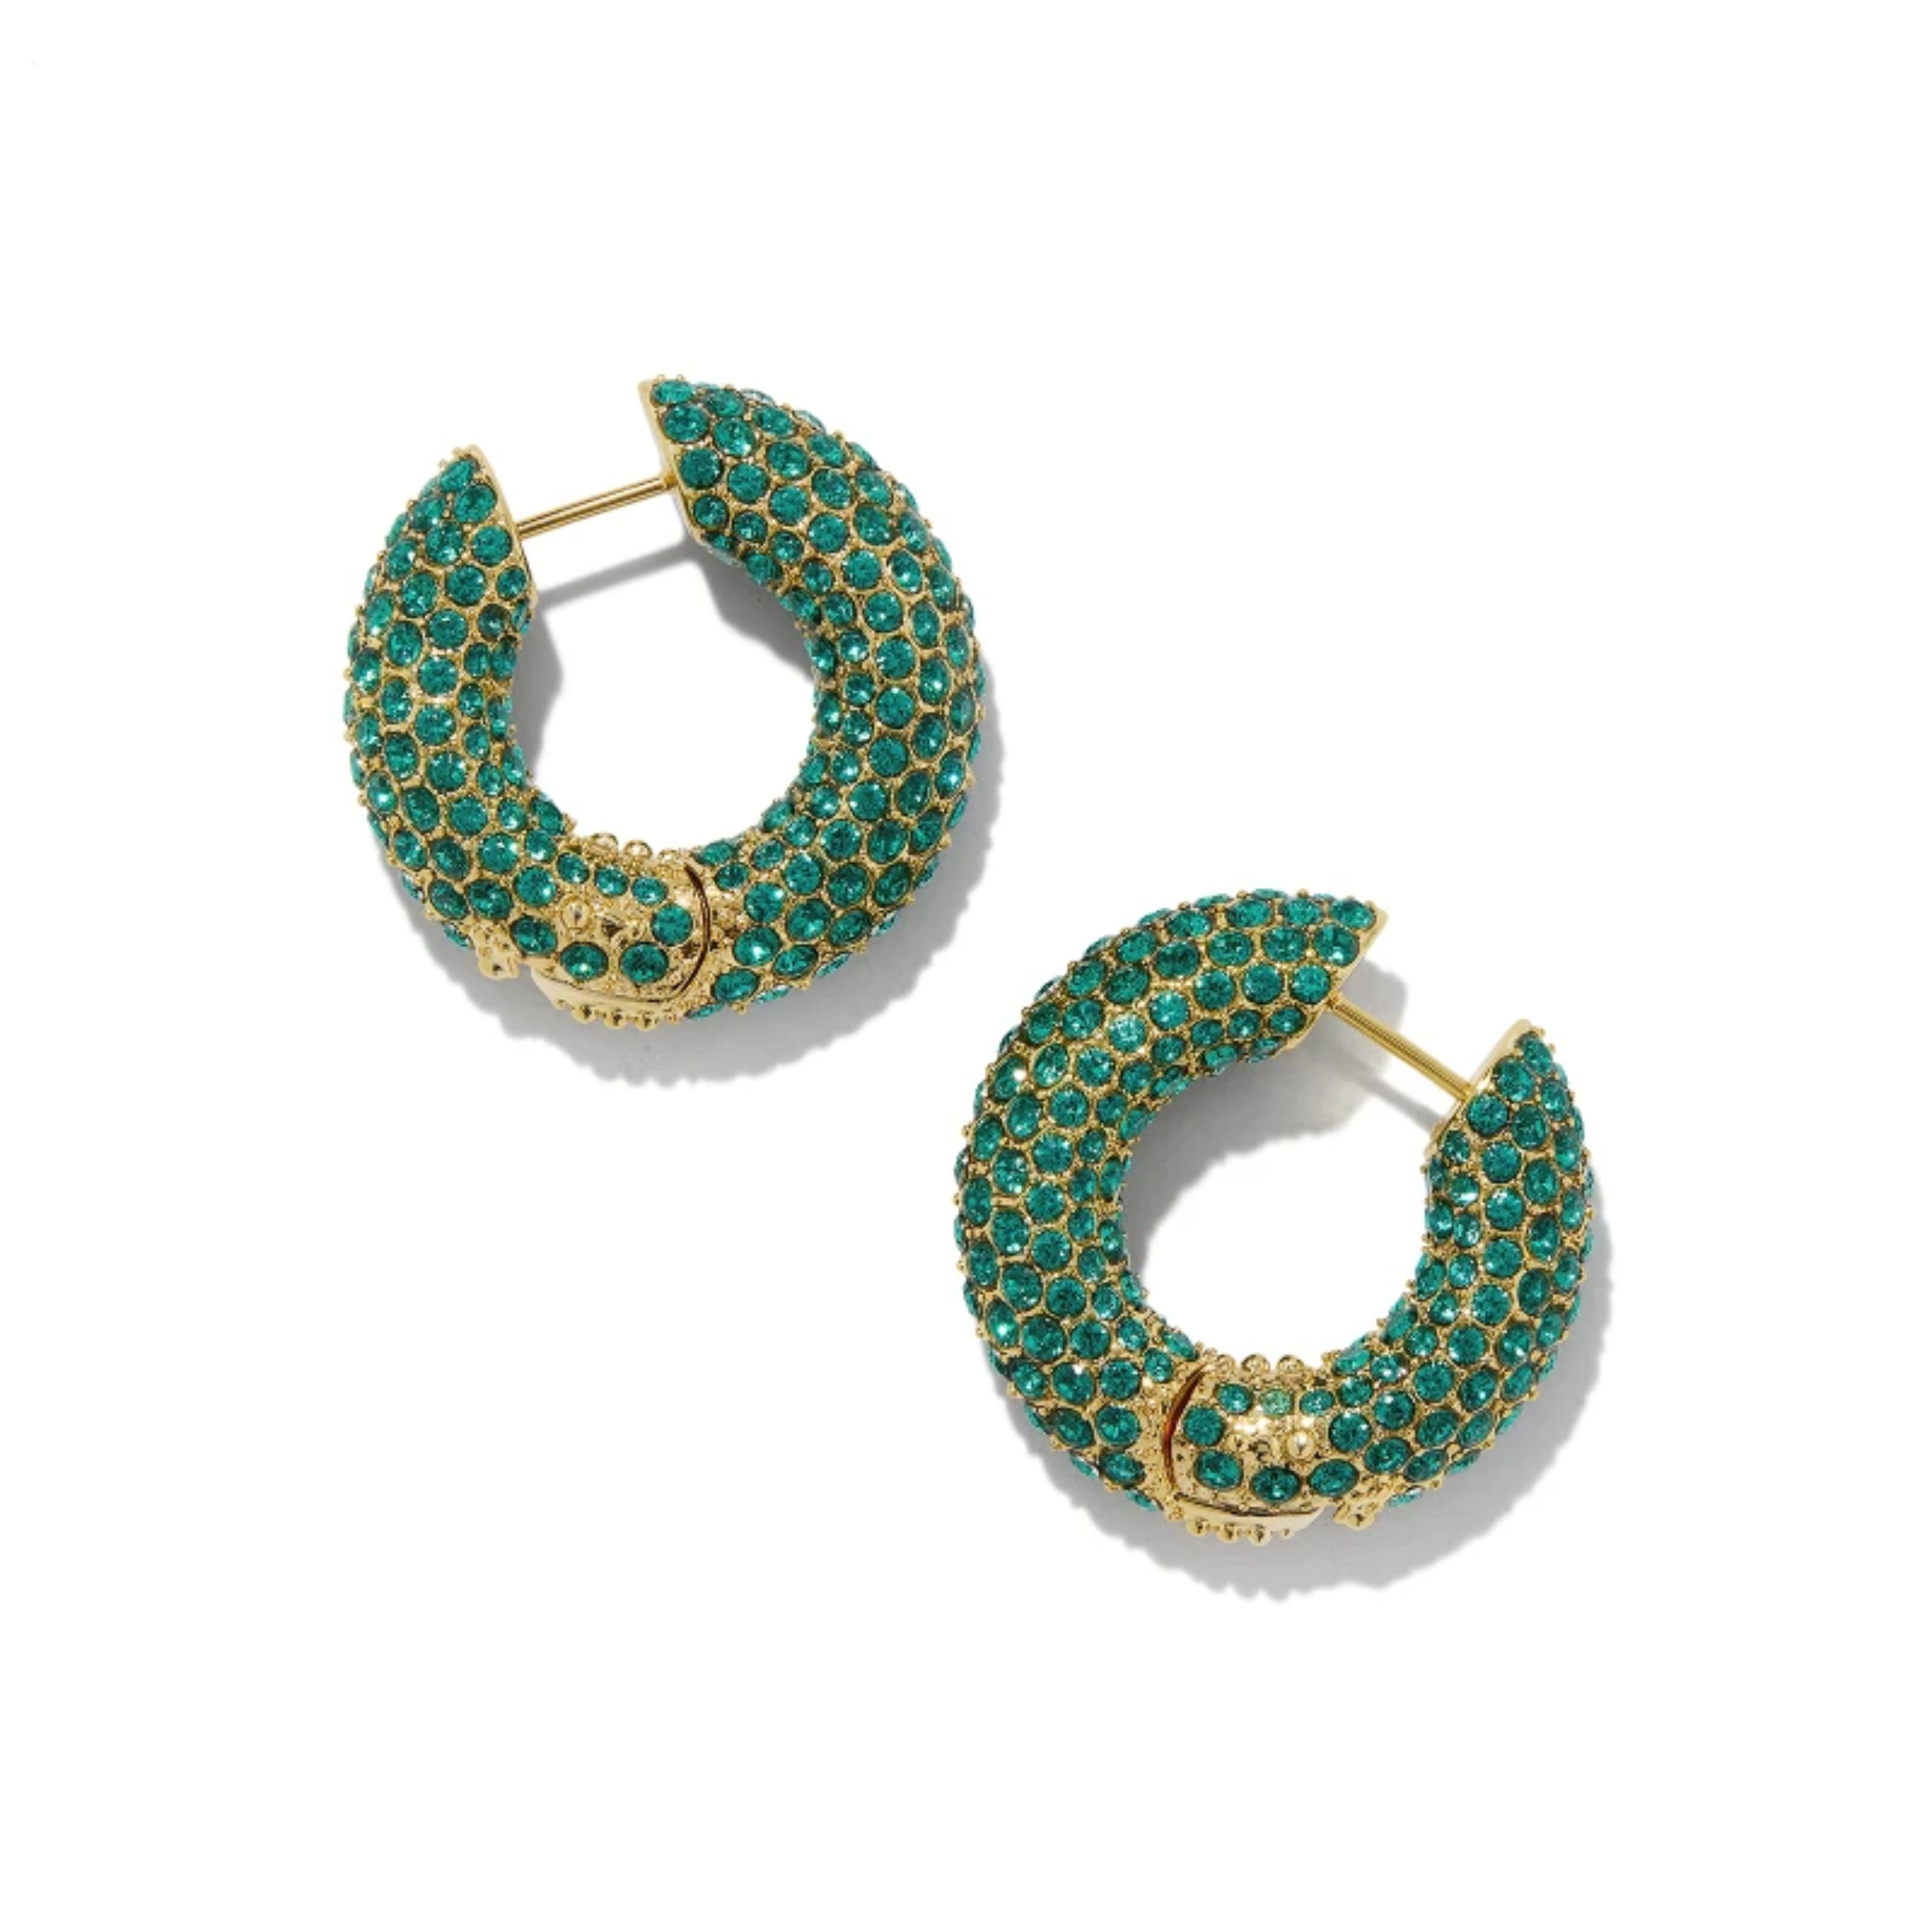 These Mikki Gold Pave Hoop Earrings in Green Crystal by Kendra Scott are pictured on a white background.